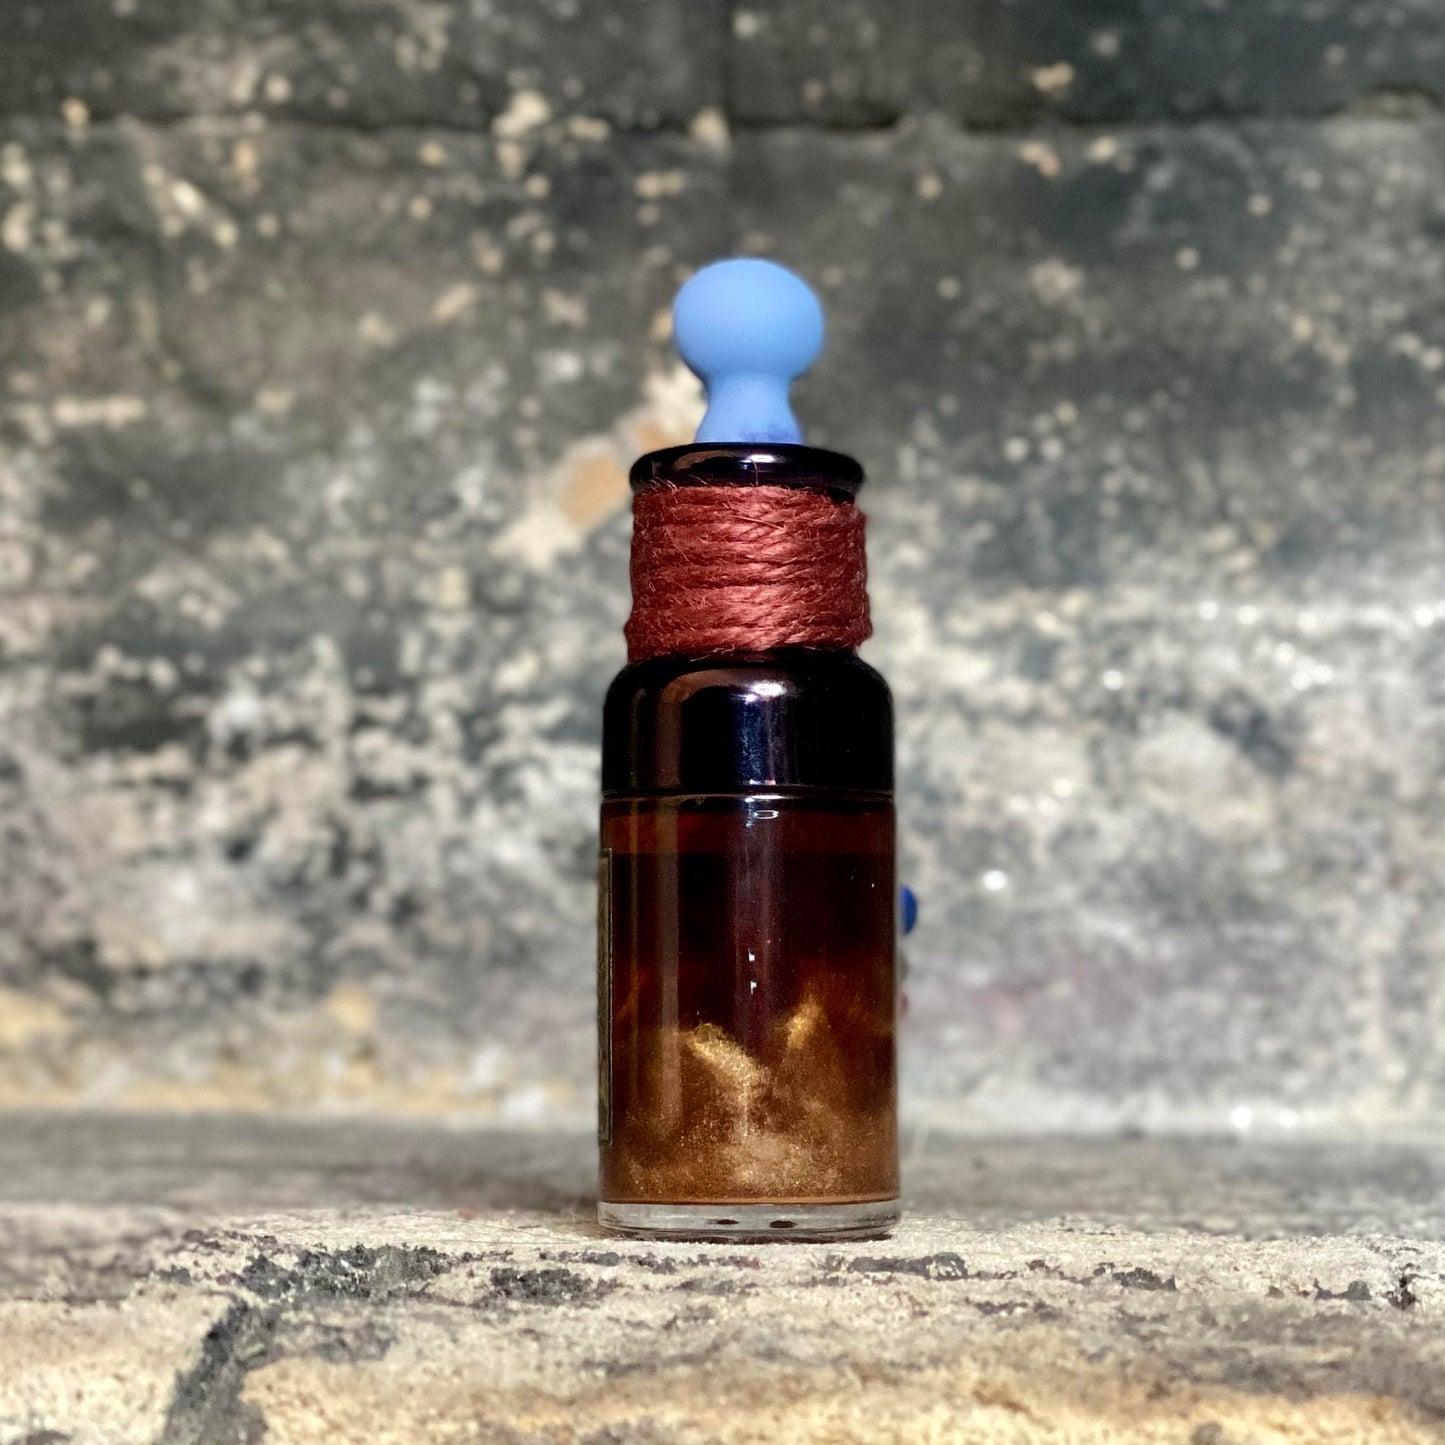 Essence of Dittany, A Magical Color Changing Potion Bottle Prop